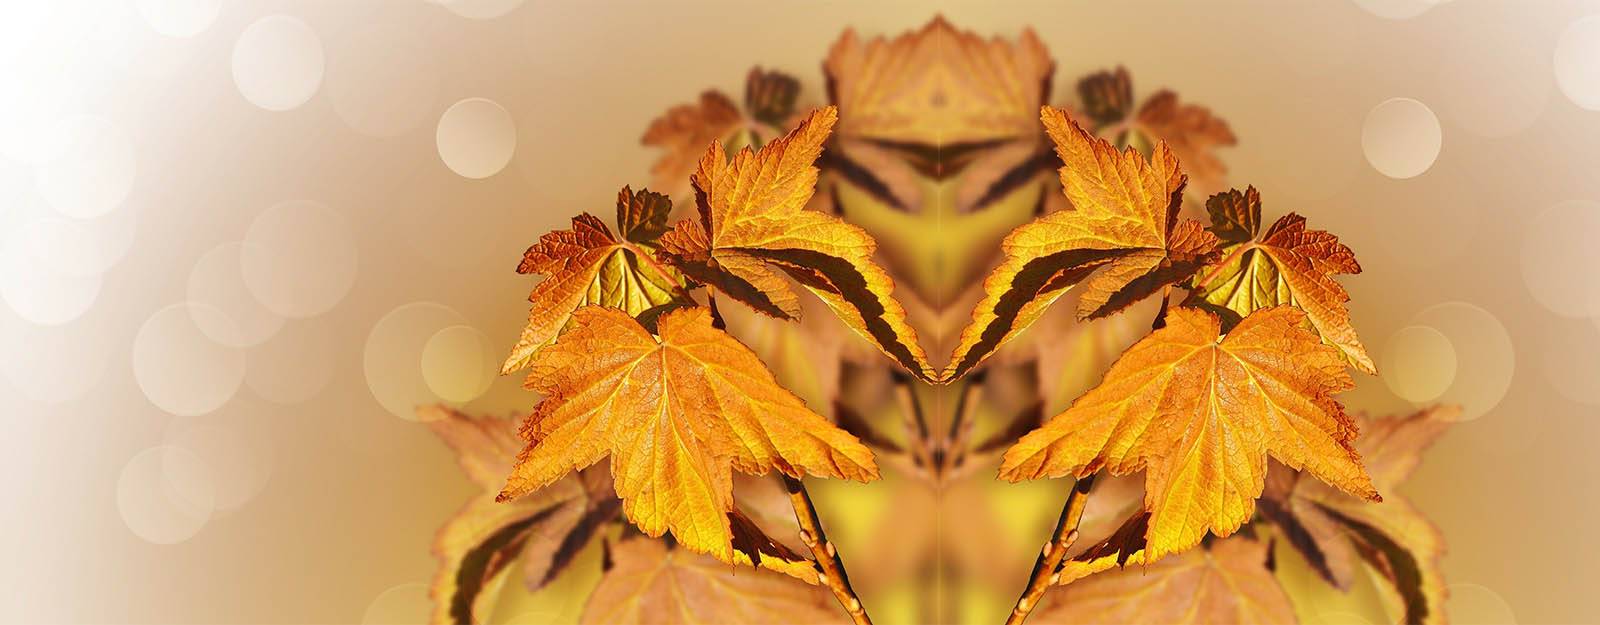 Mirrored image of fall leaves. Union State Bank CD Special.